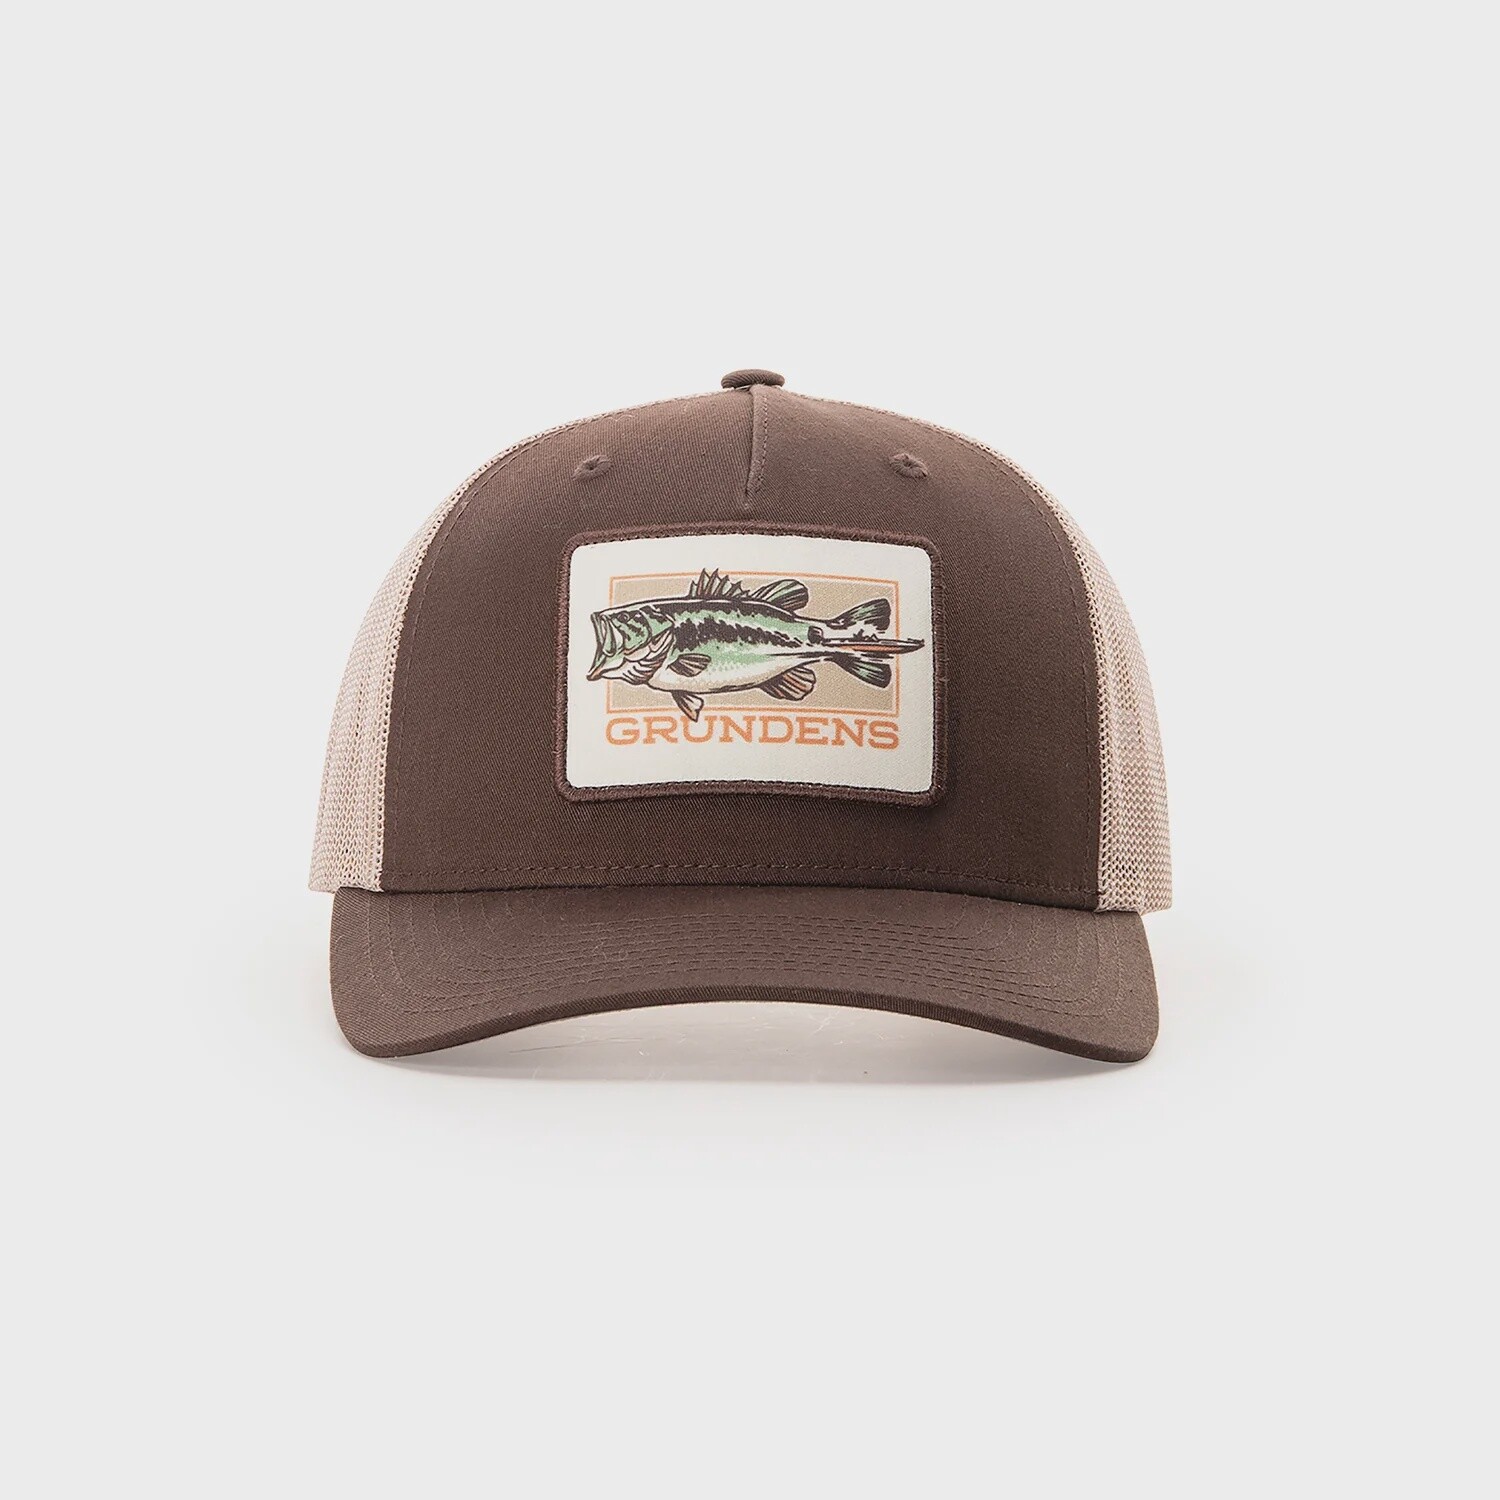 Grundens Off to the Races Trucker, Colour: Brown/Khaki